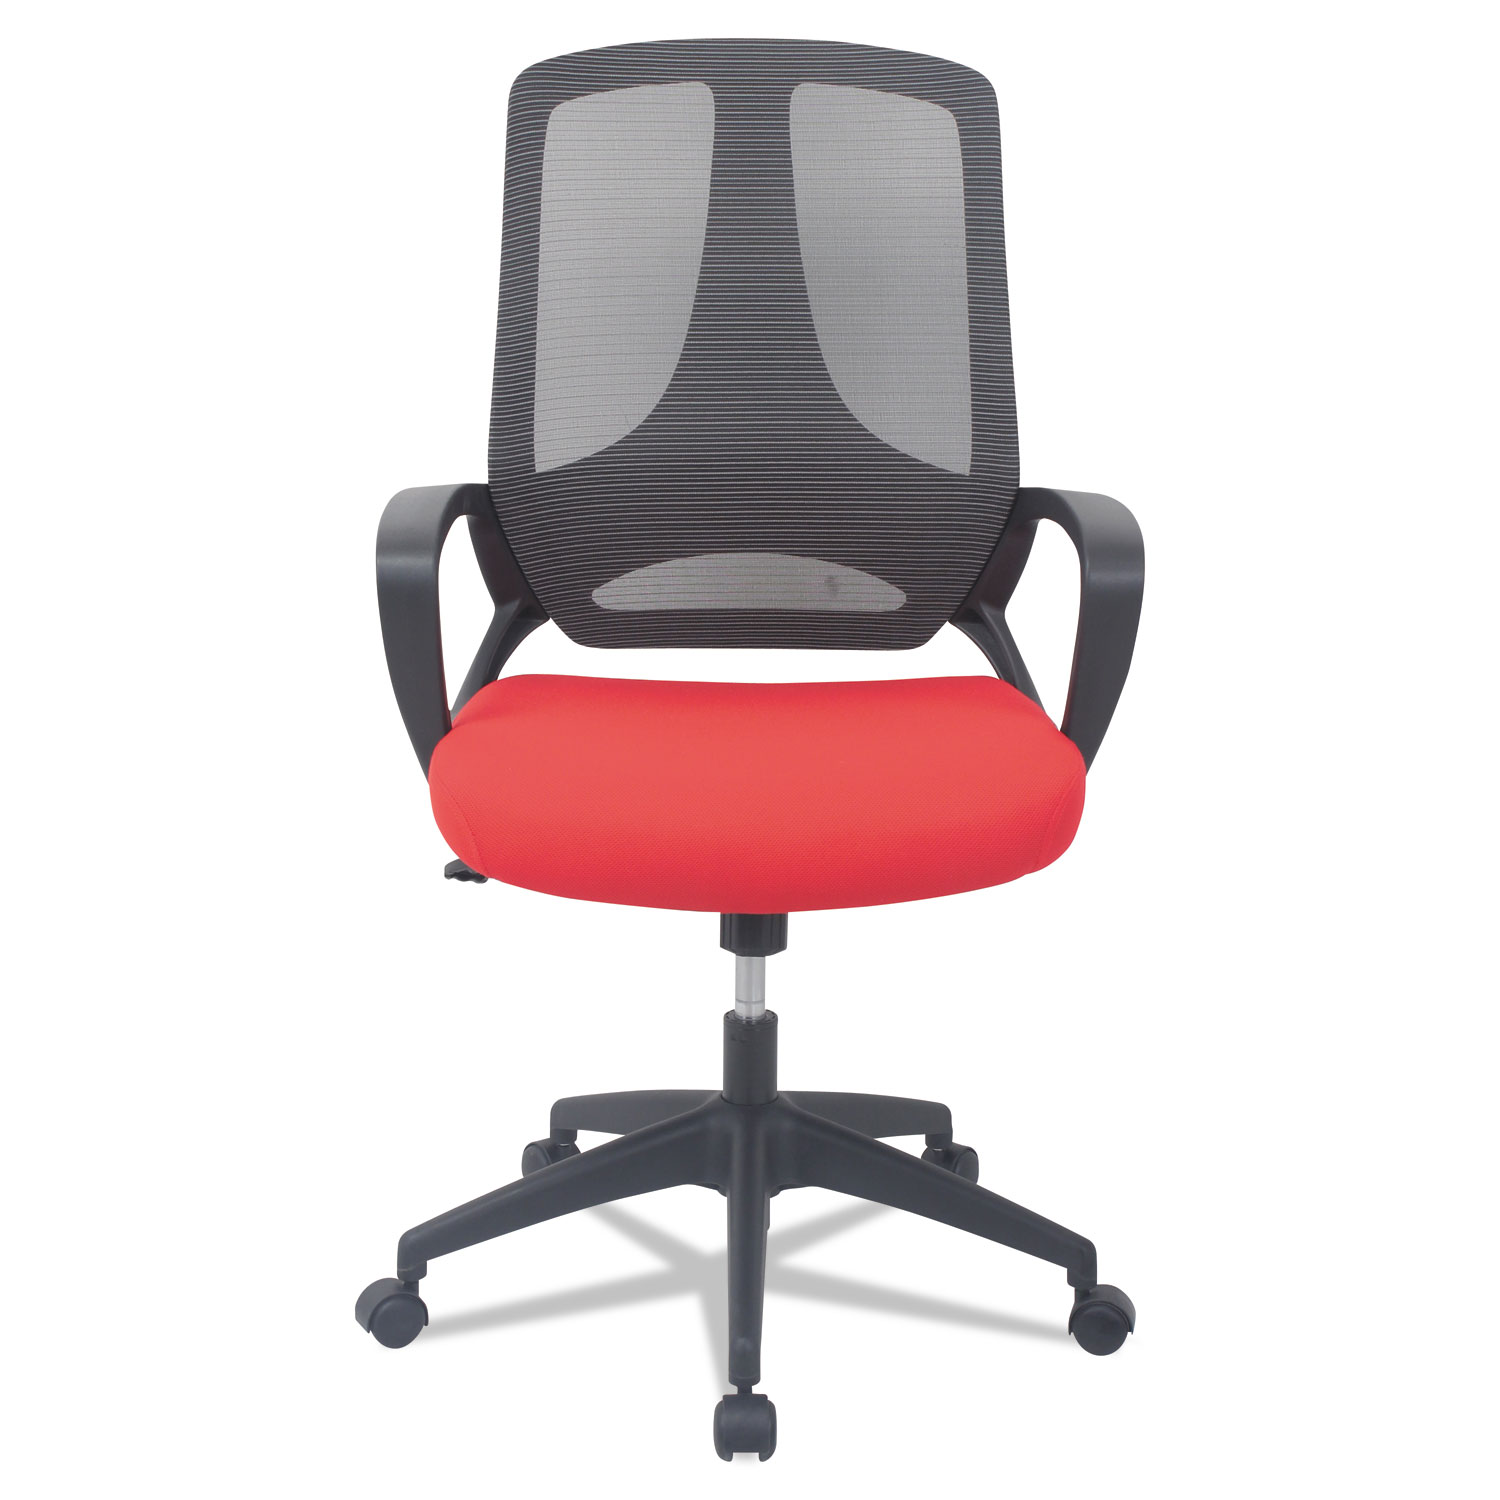 MB Series Mesh Mid-Back Office Chair, Red/Black